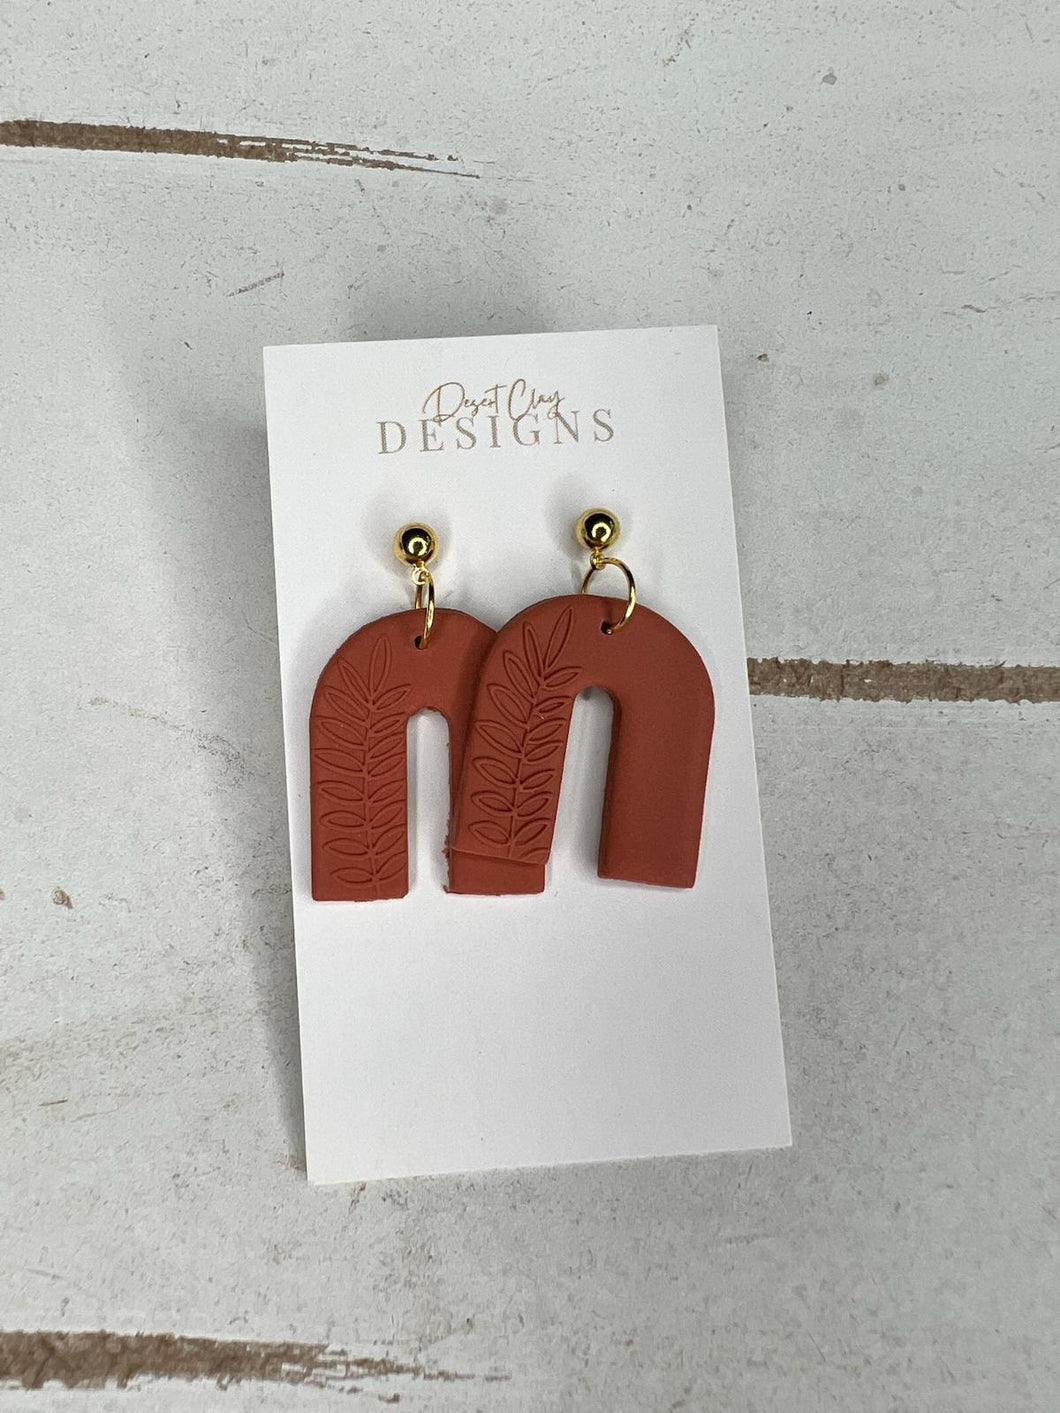 Casey arch earrings with leaves